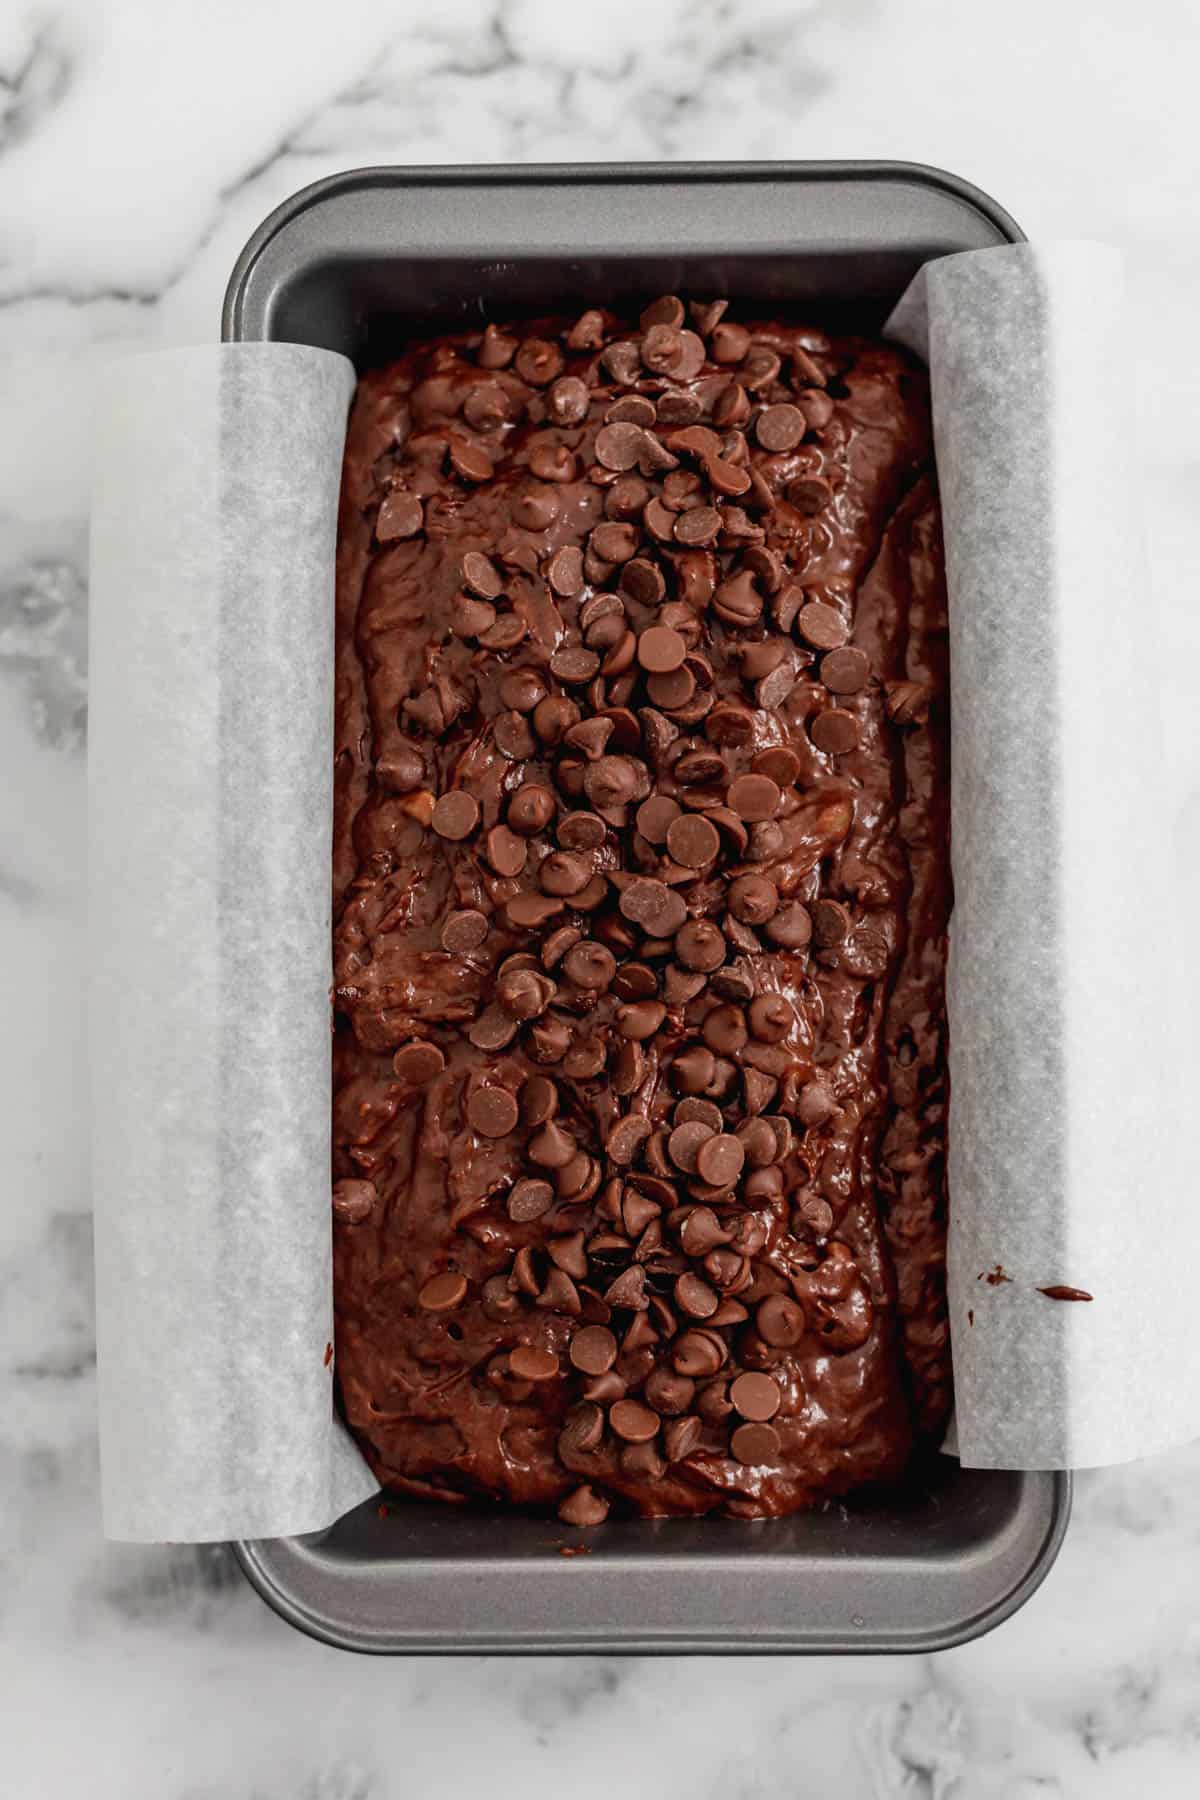 Chocolate banana bread in a bread pan with chocolate chips on top.